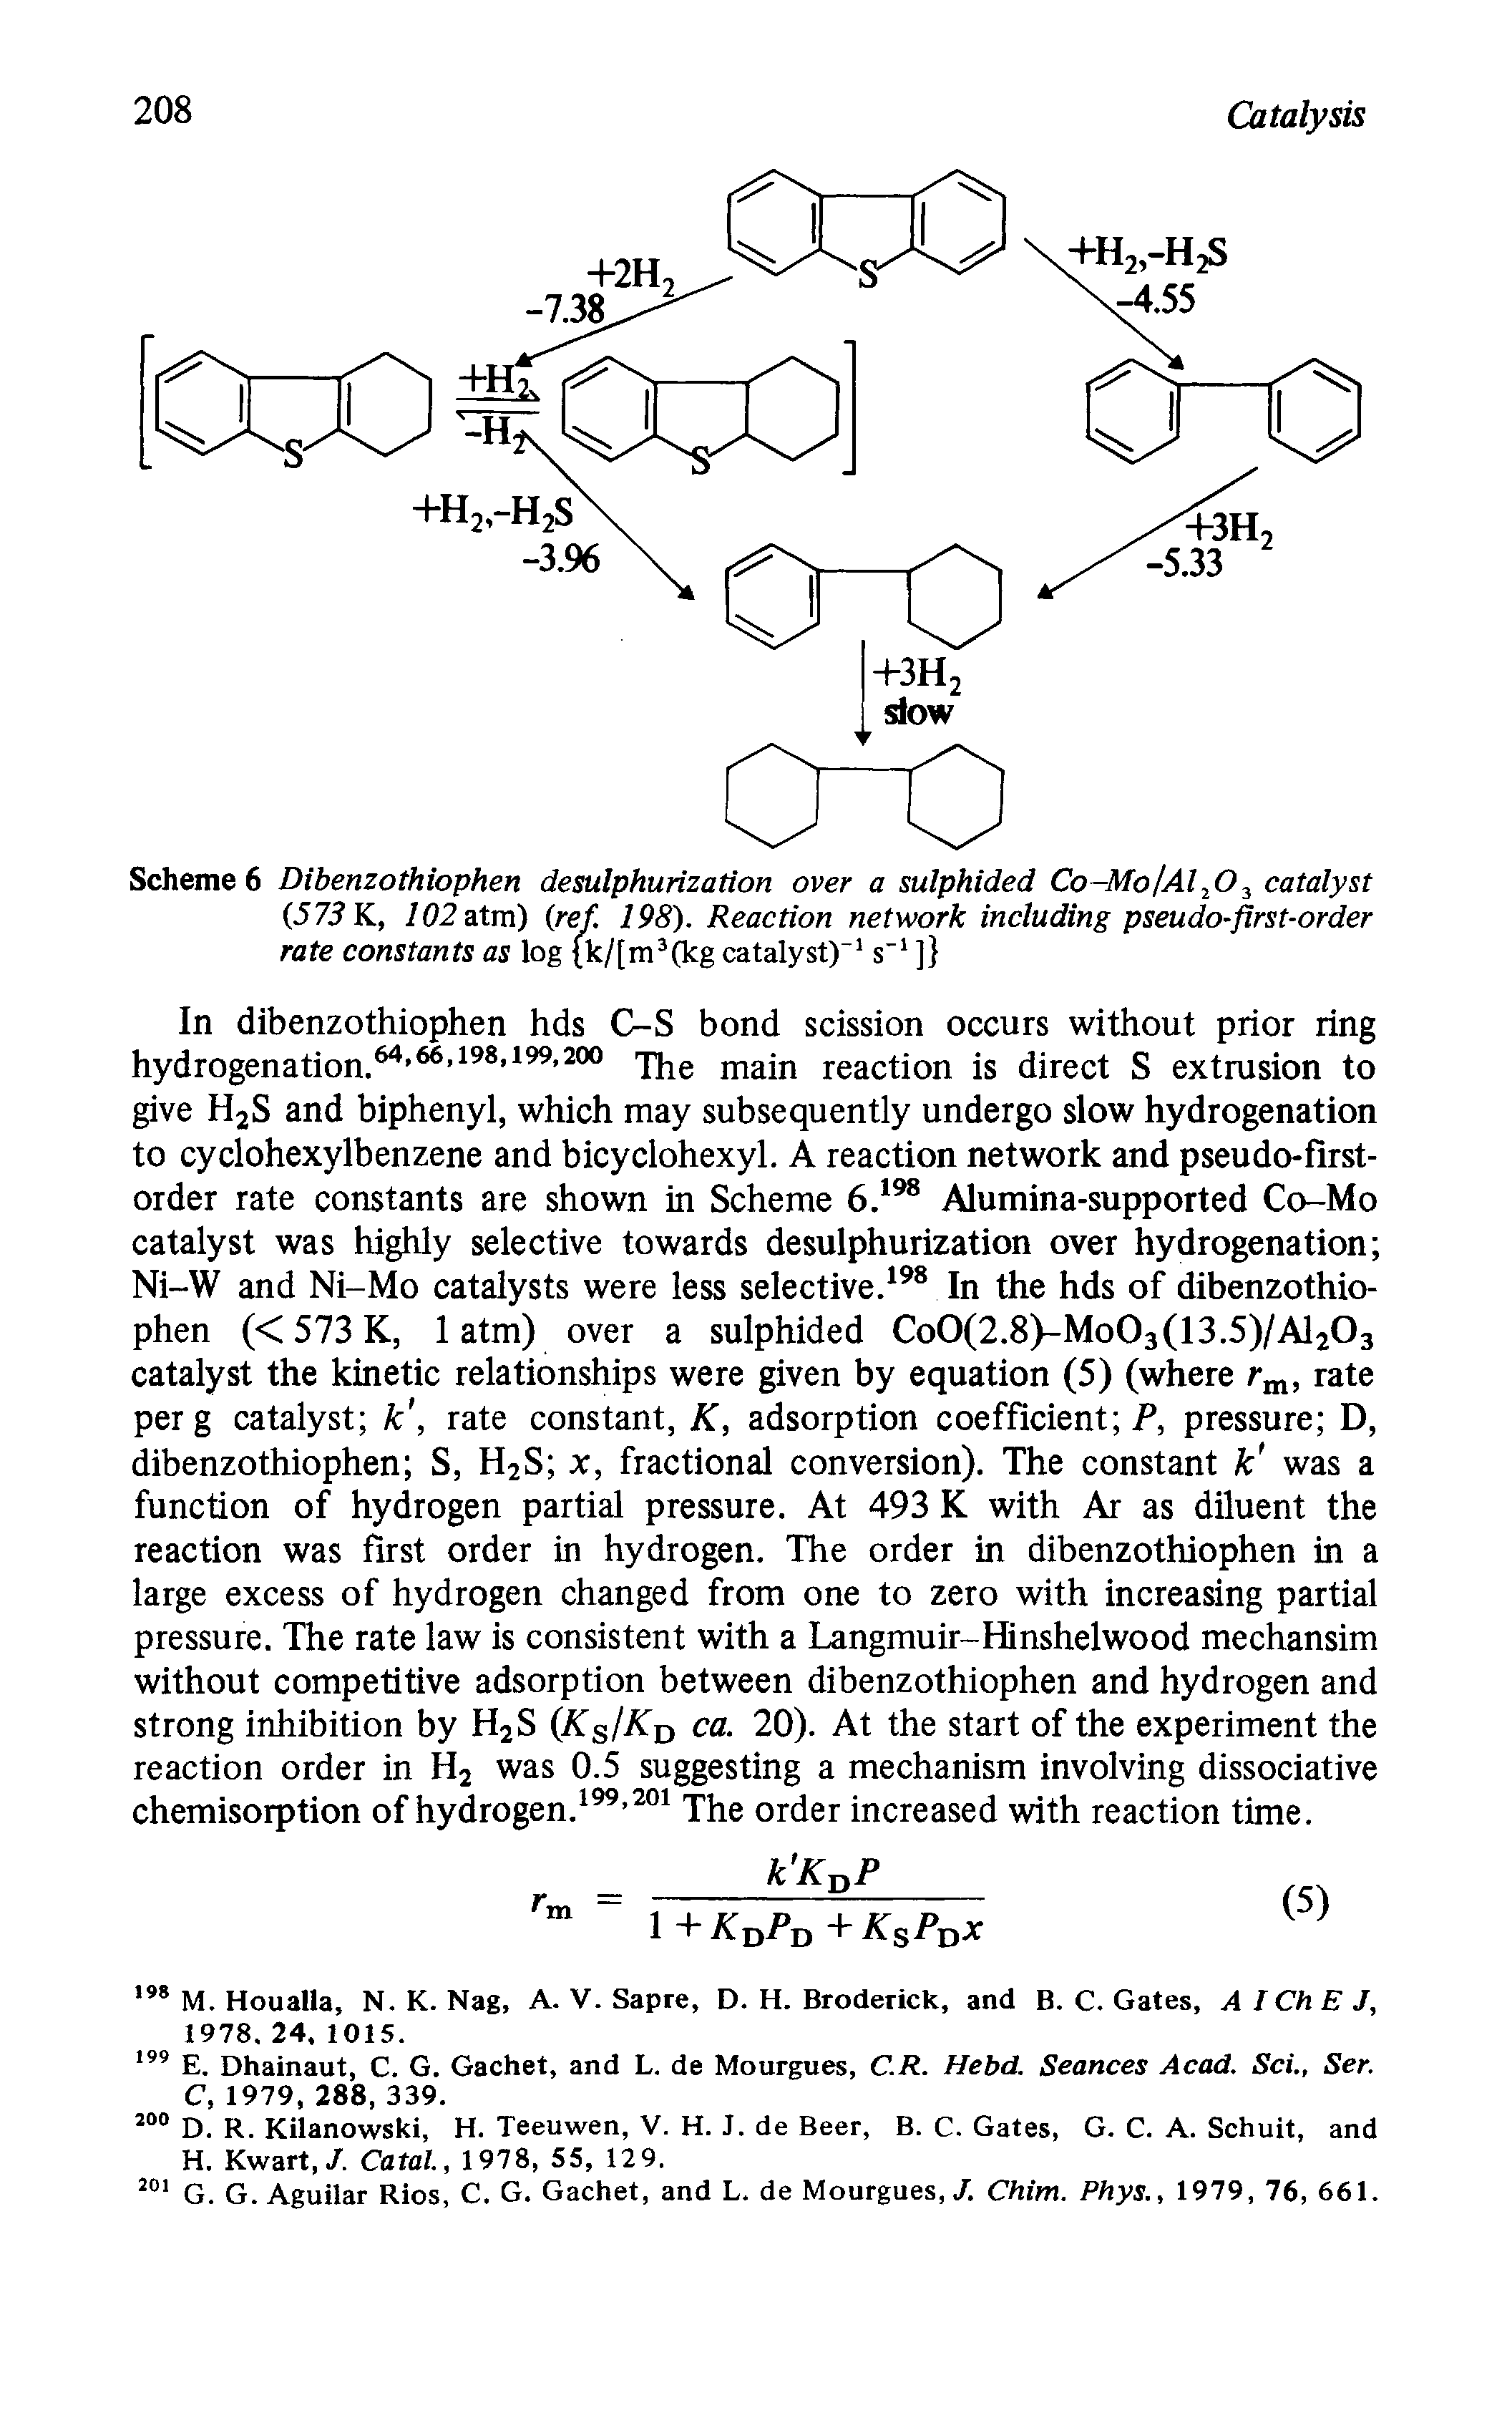 Scheme 6 Dibenzothiophen desulphurization over a sulphided Co-MolAl O catalyst (57 K, 7( 2atm) ref. 198). Reaction network including pseudo-first-order rate constants as log (k/[m (kg catalyst)" s" ] ...